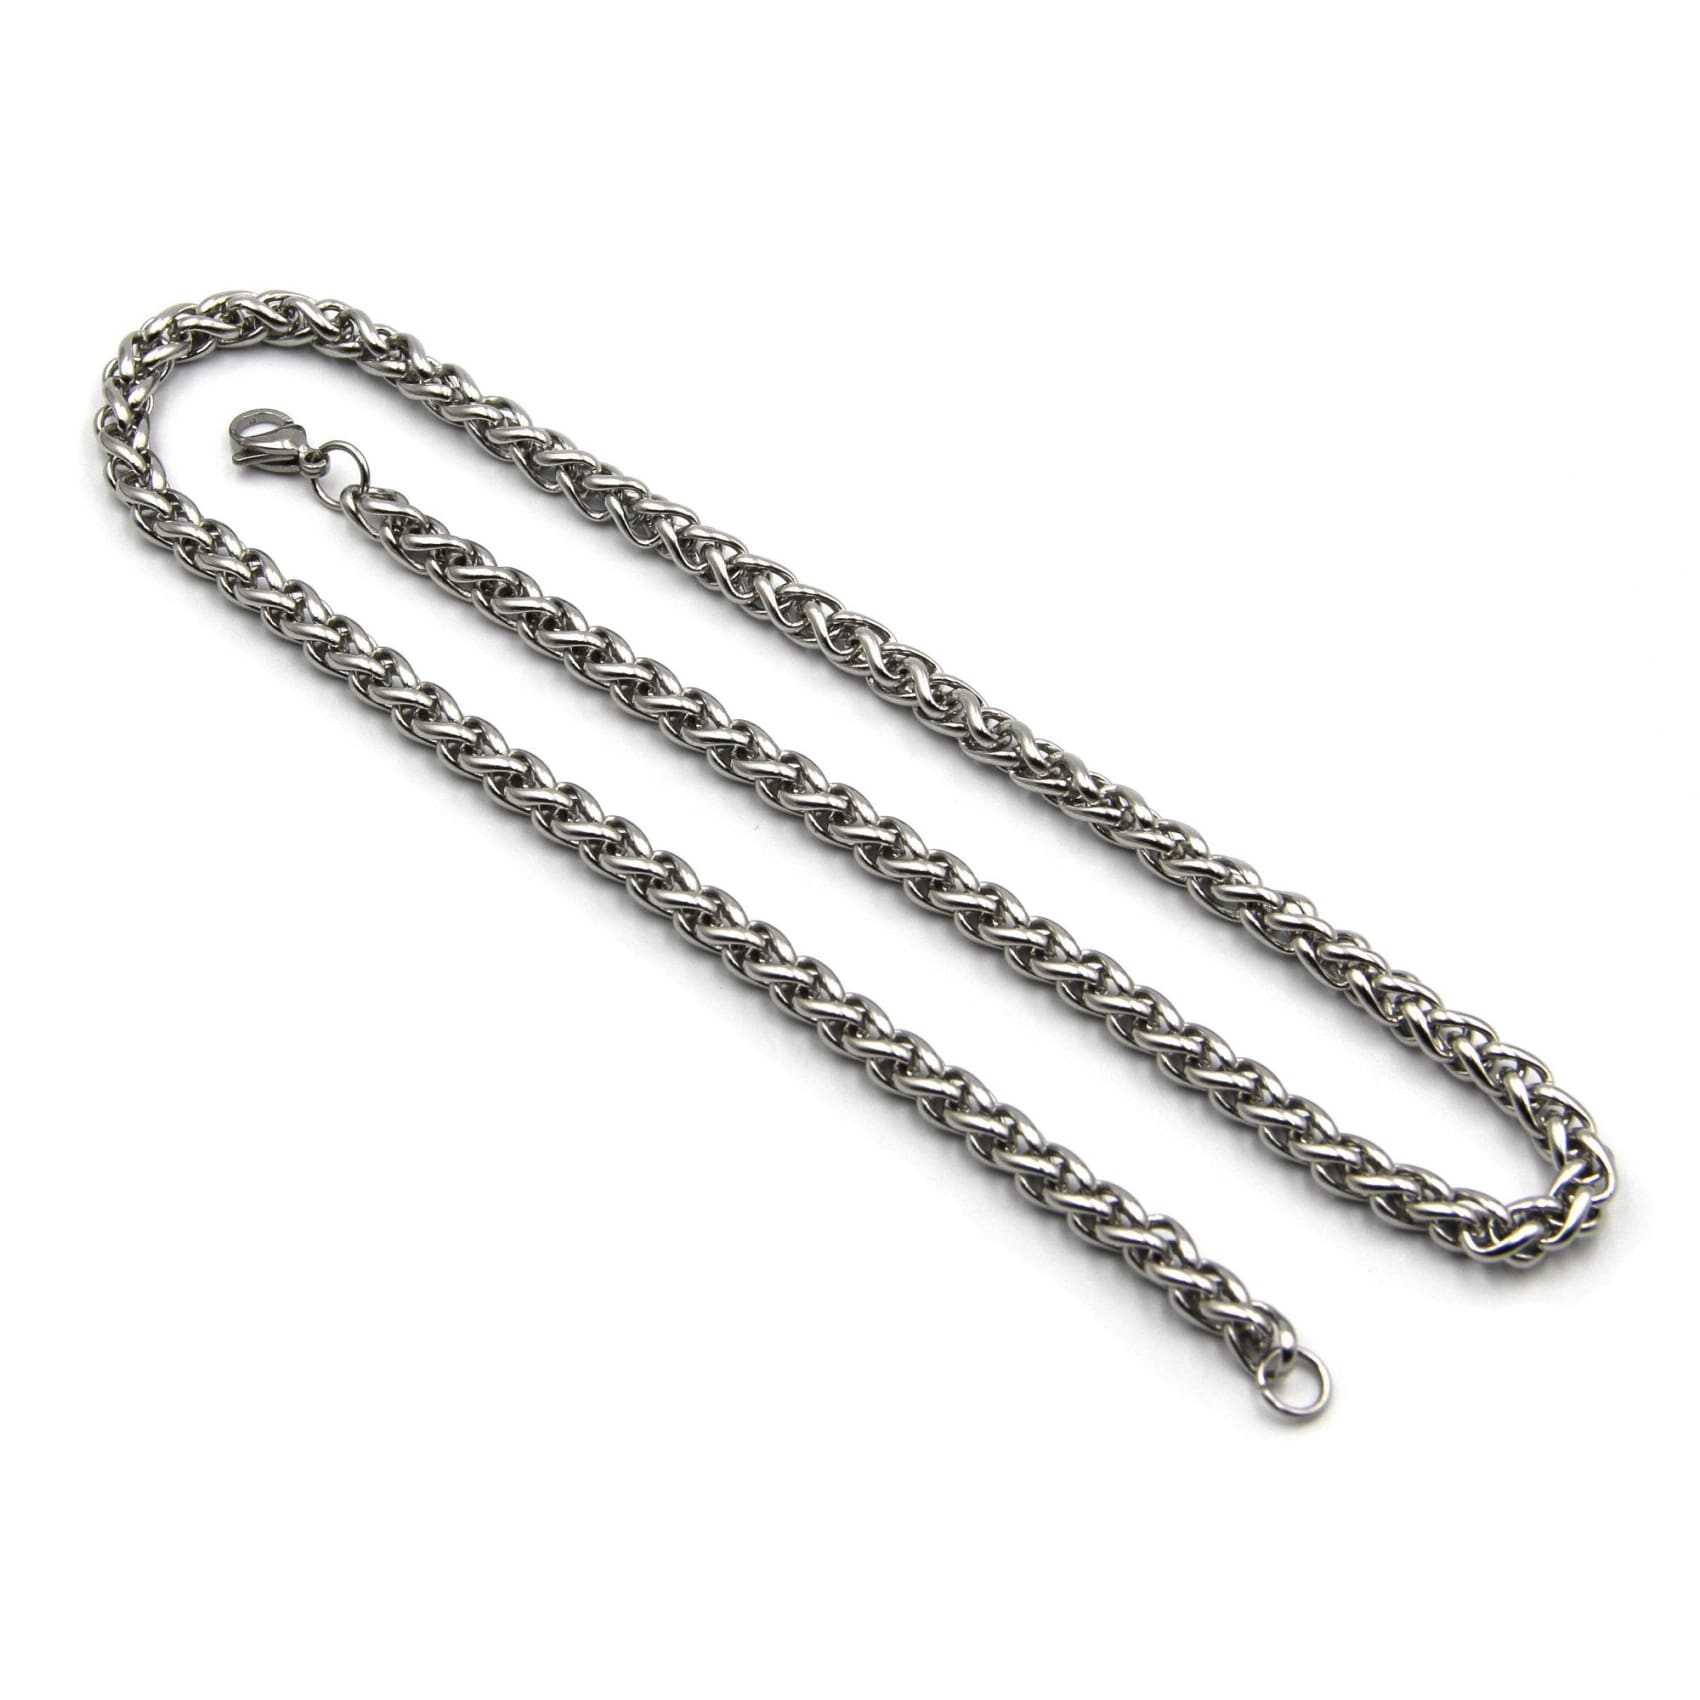 Wheat Necklace 316 stainless steel chain - Metal Field